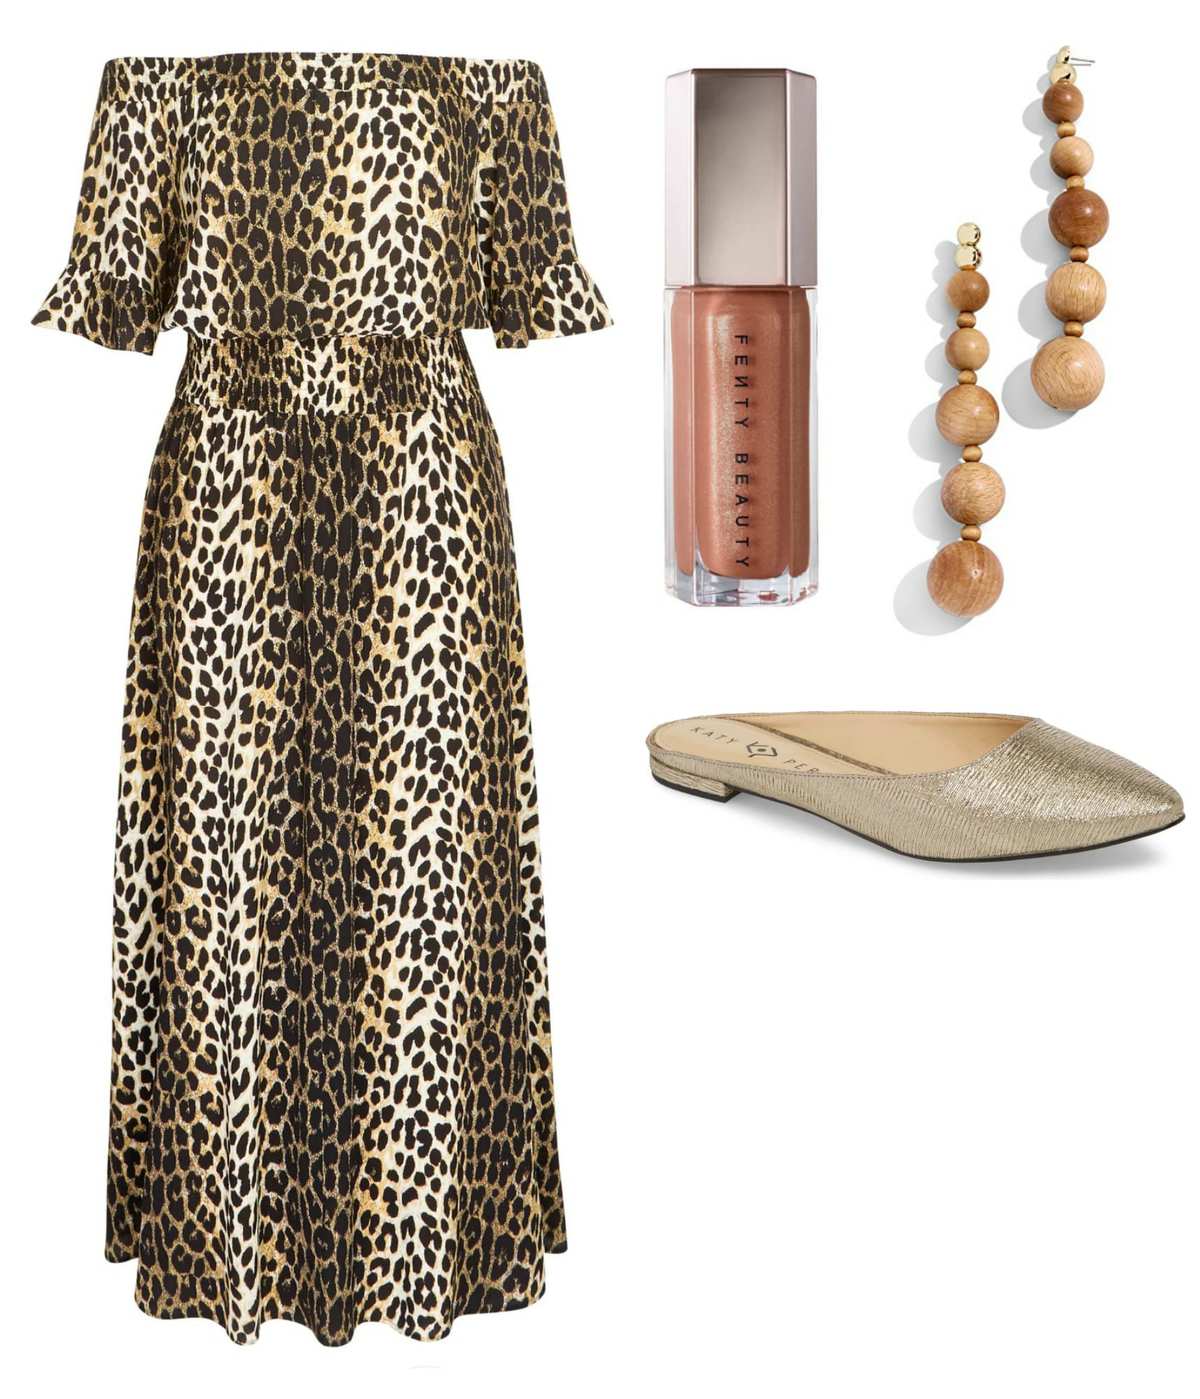 When dressing to hostess an event in your home, you can go glam with leopard prints, silky fabrics, and off the shoulder silhouettes